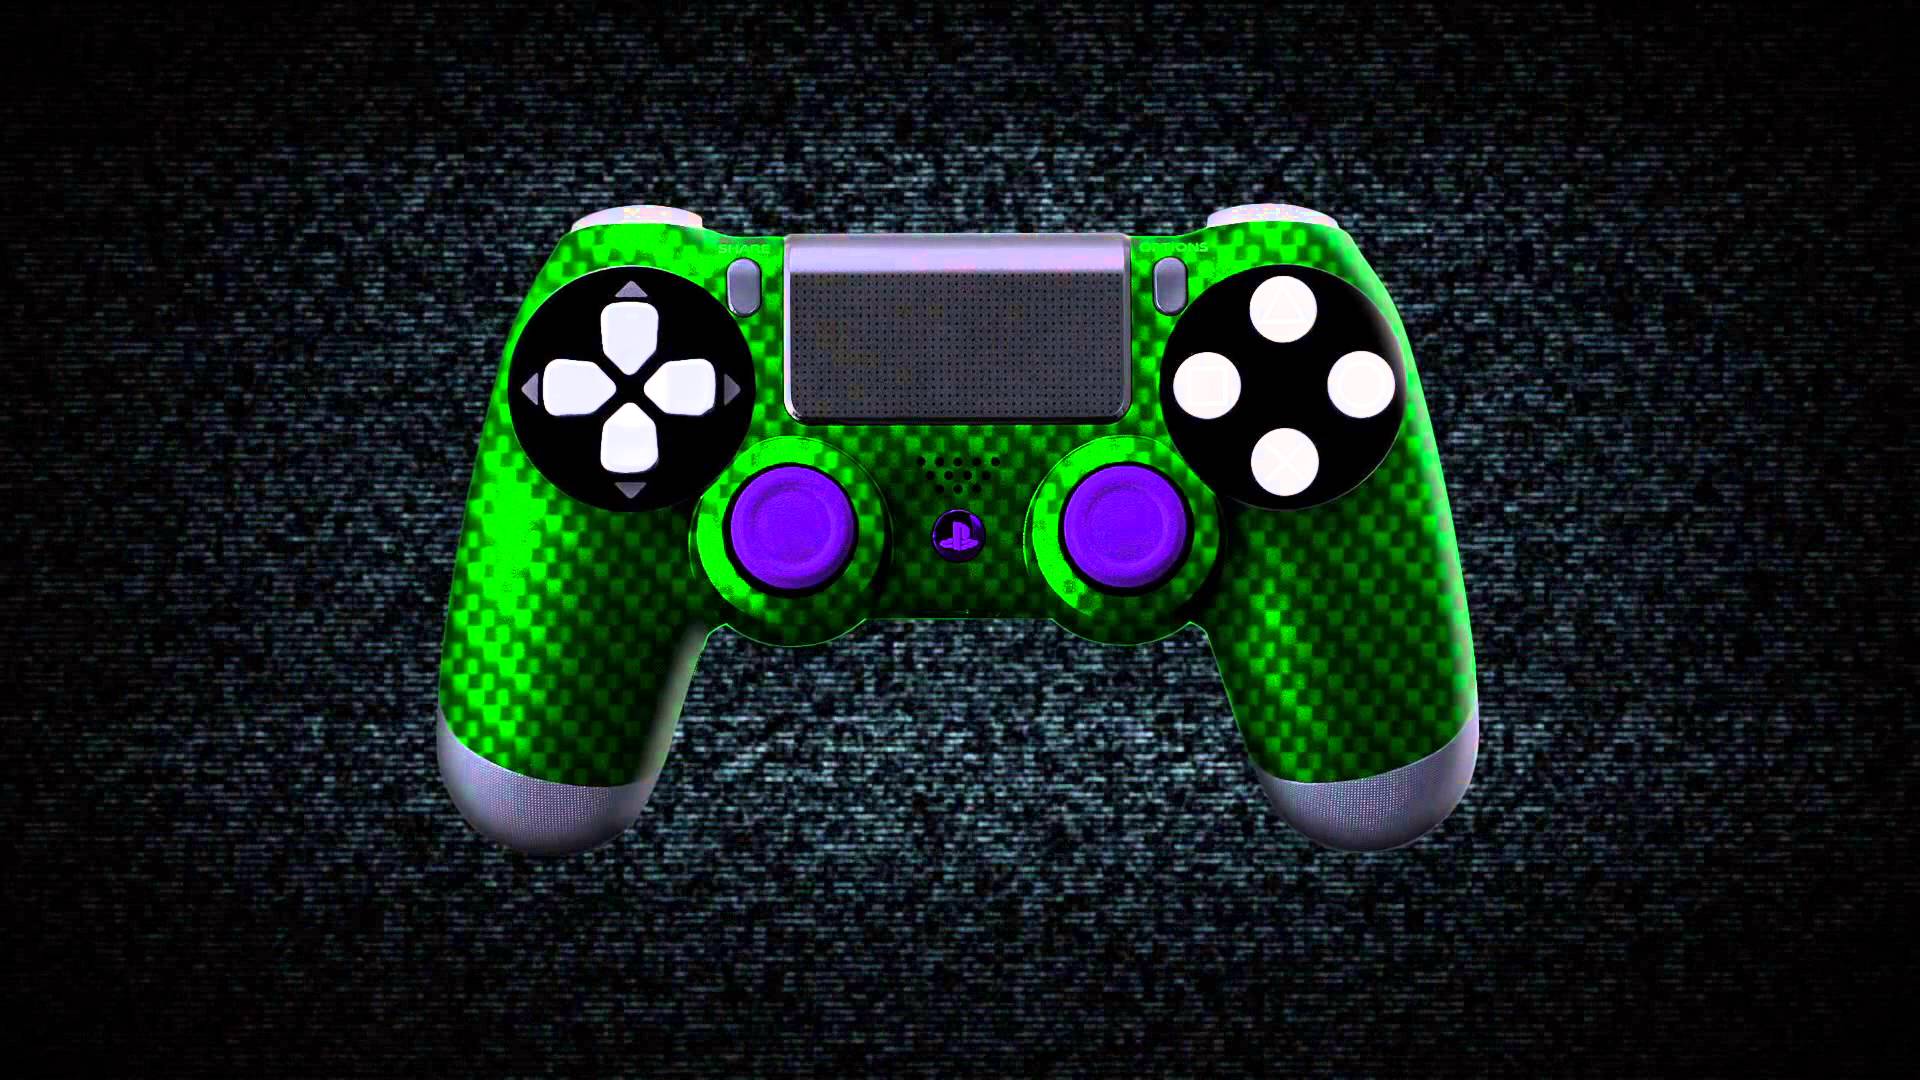 Free download PS4 Controllers Modded Controllers Presented